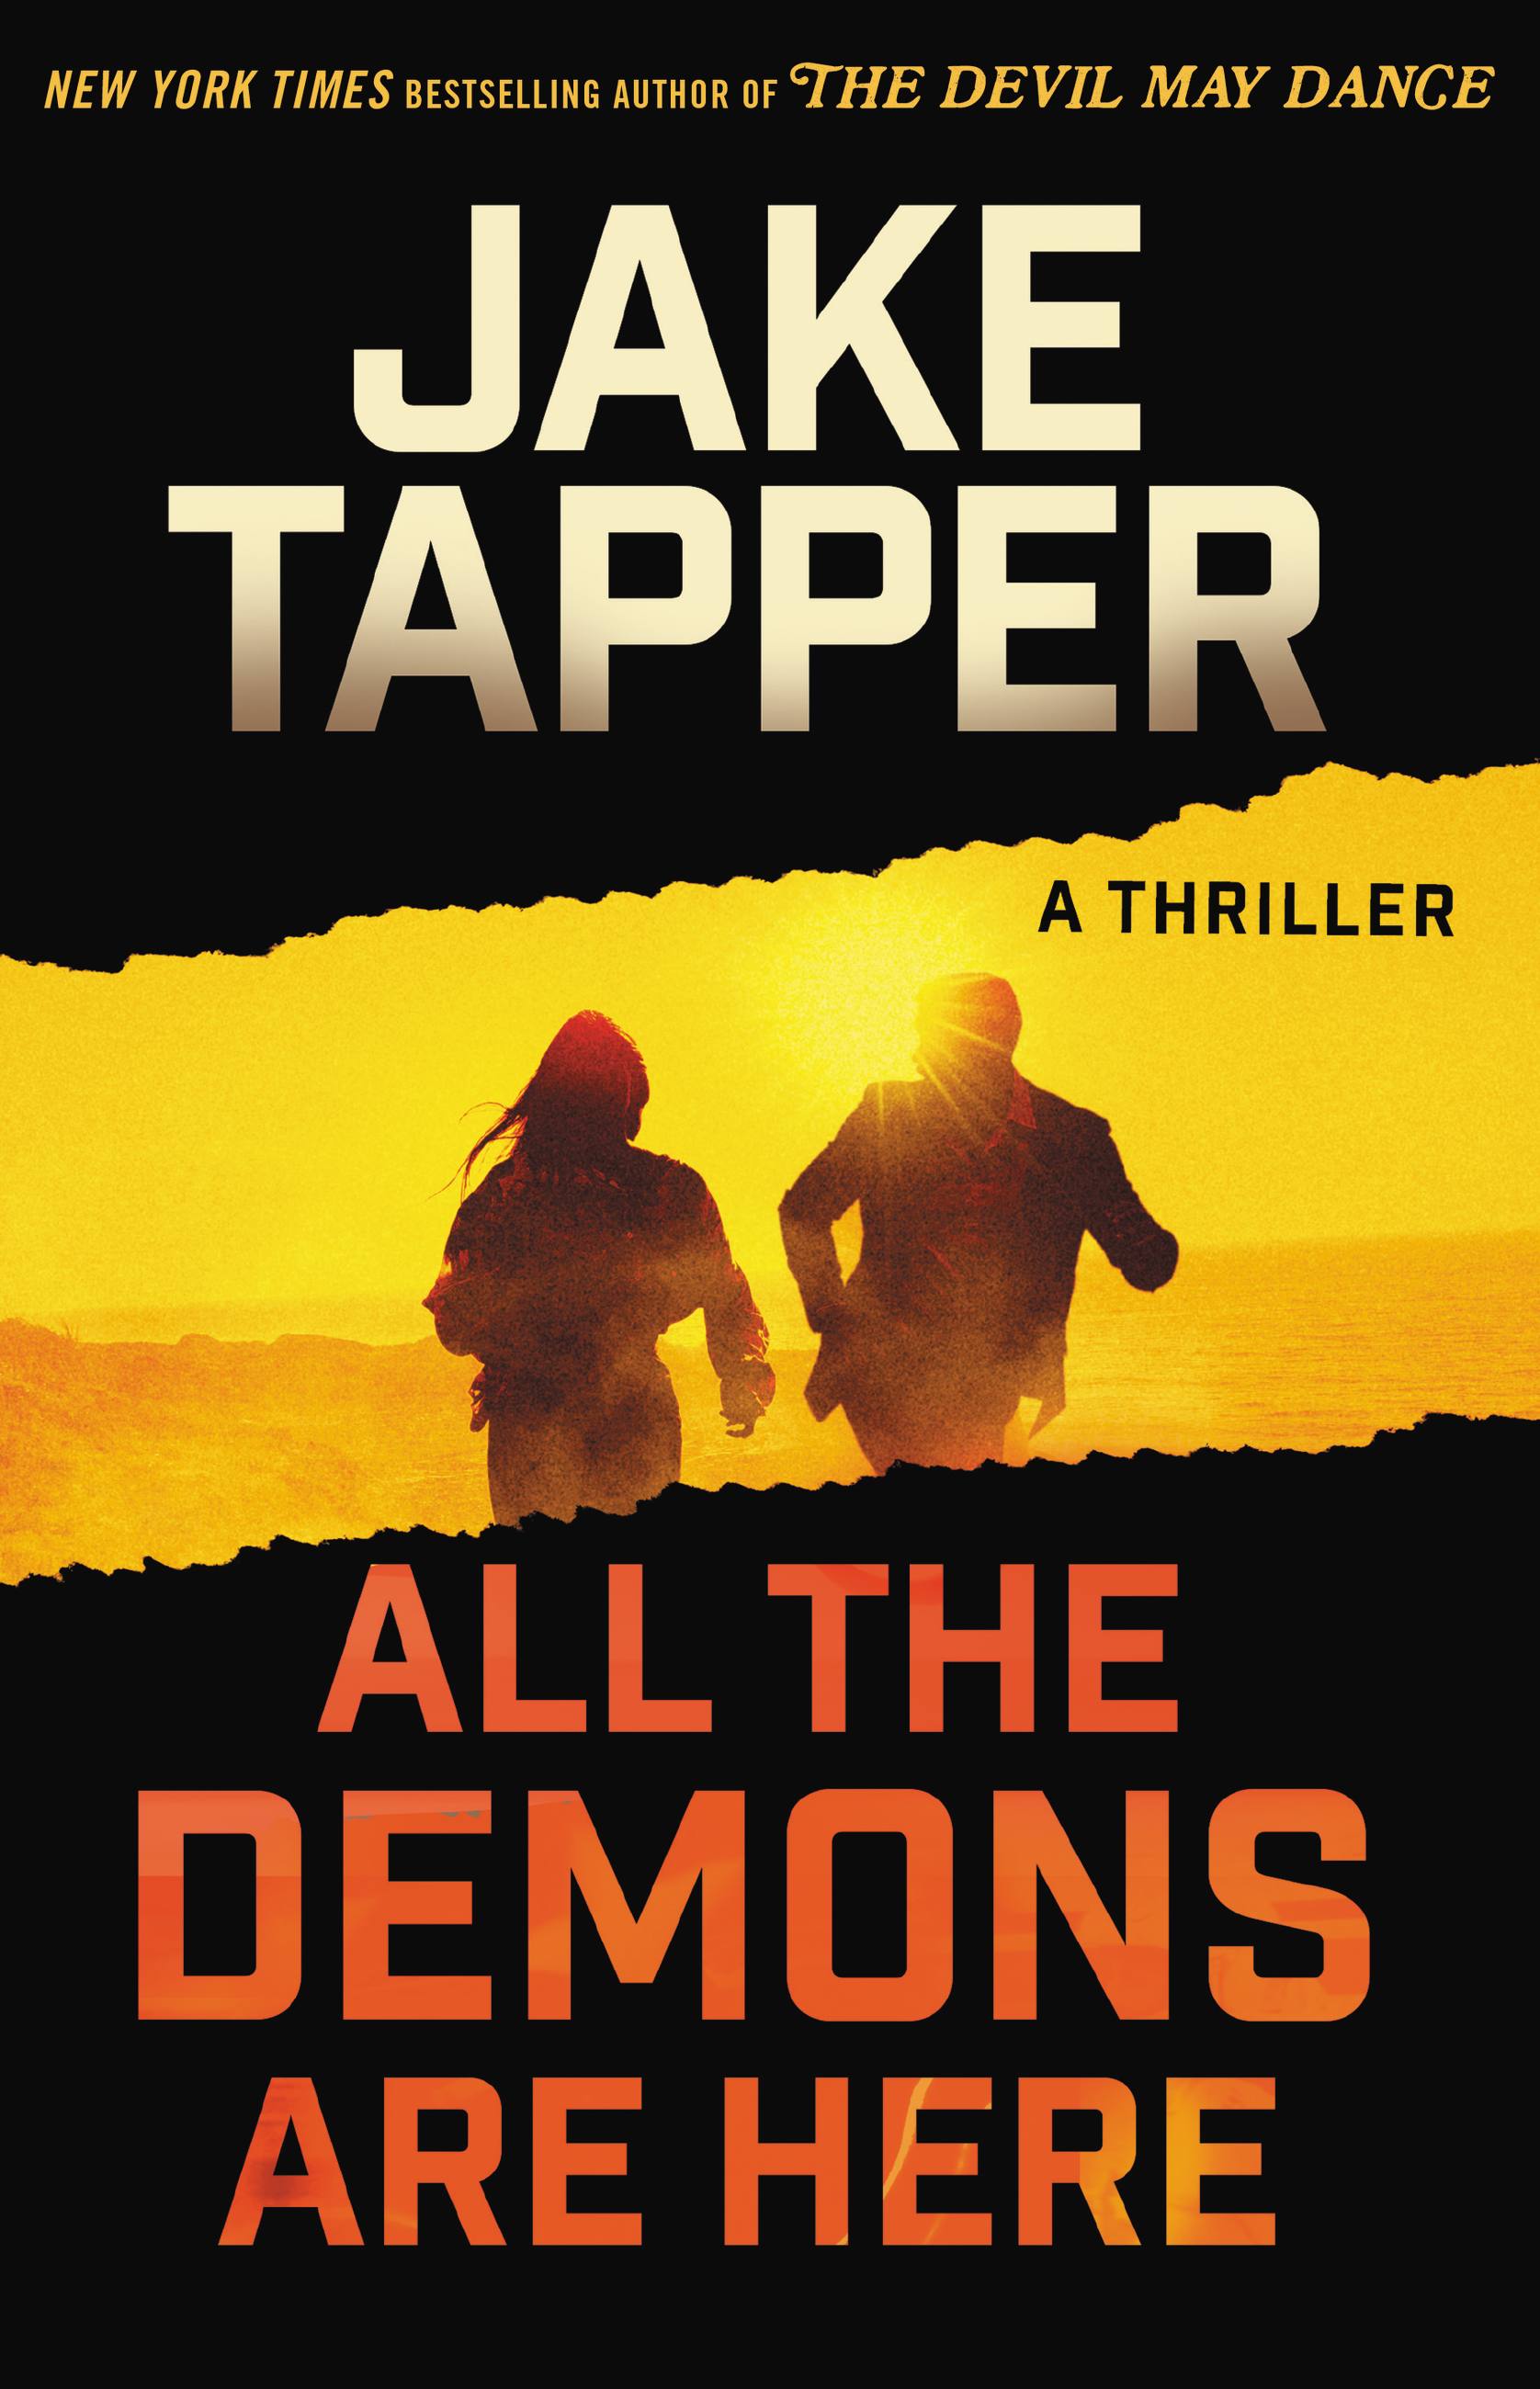 All the Devils Are Here: A Novel [Book]